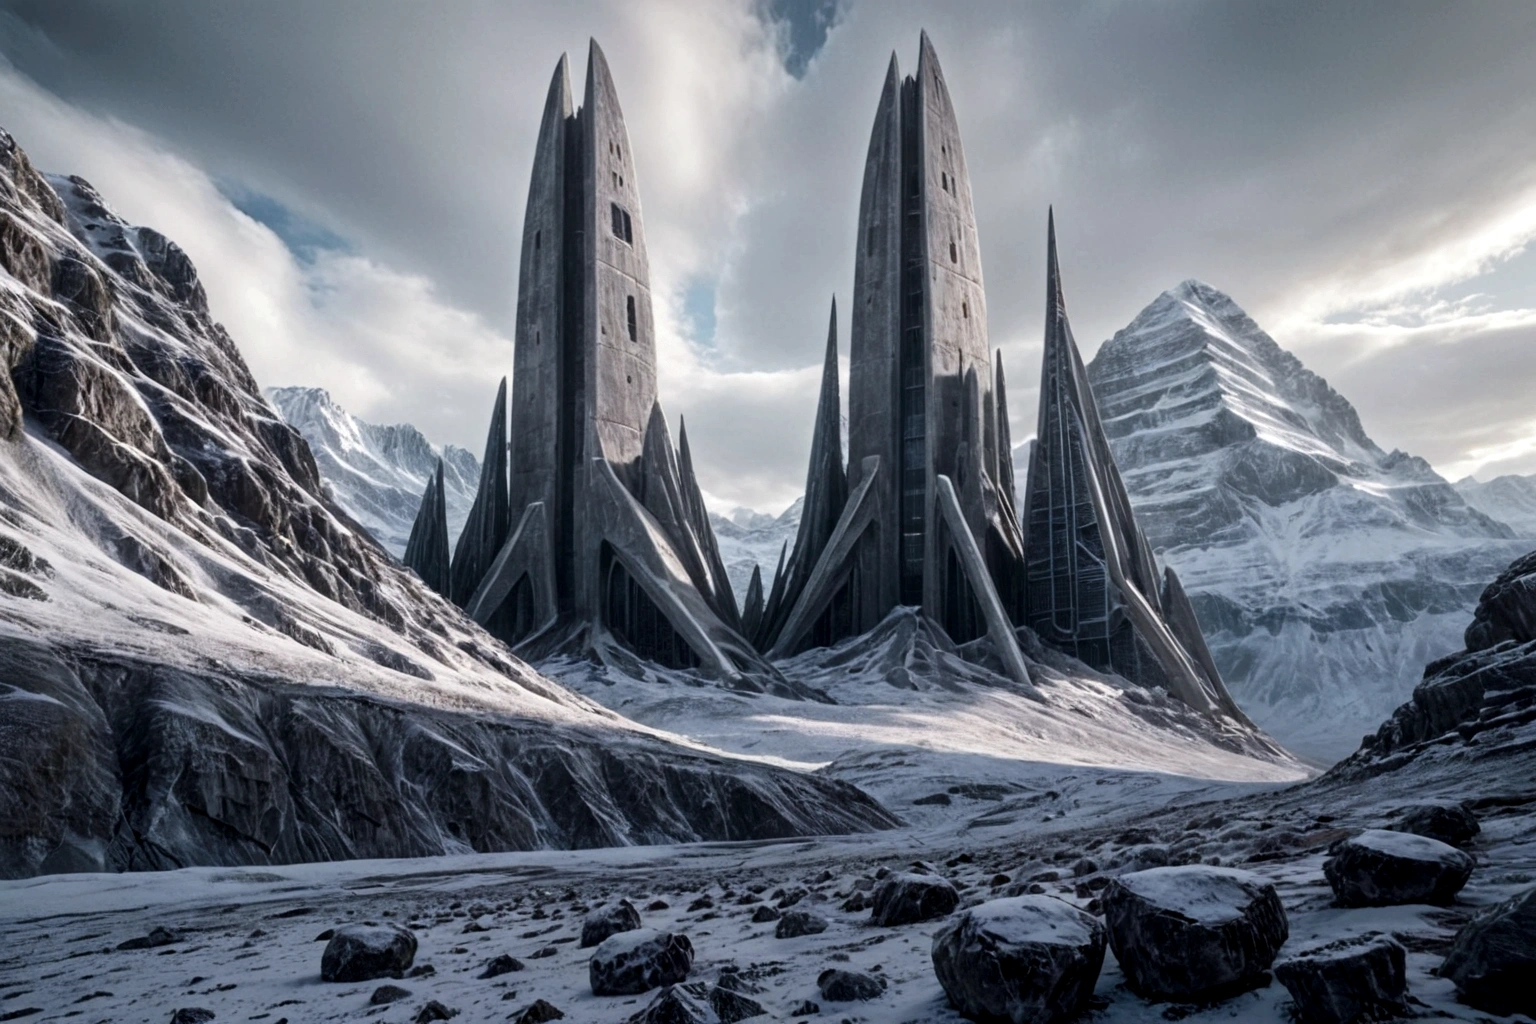 futuristic concrete fortress ON AN ALIEN PLANET STEEP AND INTRINSIC MOUNTAINS WITH SHARP ROCKS WITH SNOW AND ICE, EL CIELO TORMENTOSO APLOMADO, GRAY AND COLD HAS THE CLOUDS DESTROYED BY THE FREEZING WIND FROM THE POLE, IMAGEN HIPER REALISTA, MAXIMUM DEPTH OF FIELD, MAXIMUM HDR 4K RESOLUTION, PERSPECTIVA PERFECTA PARA fortaleza alien